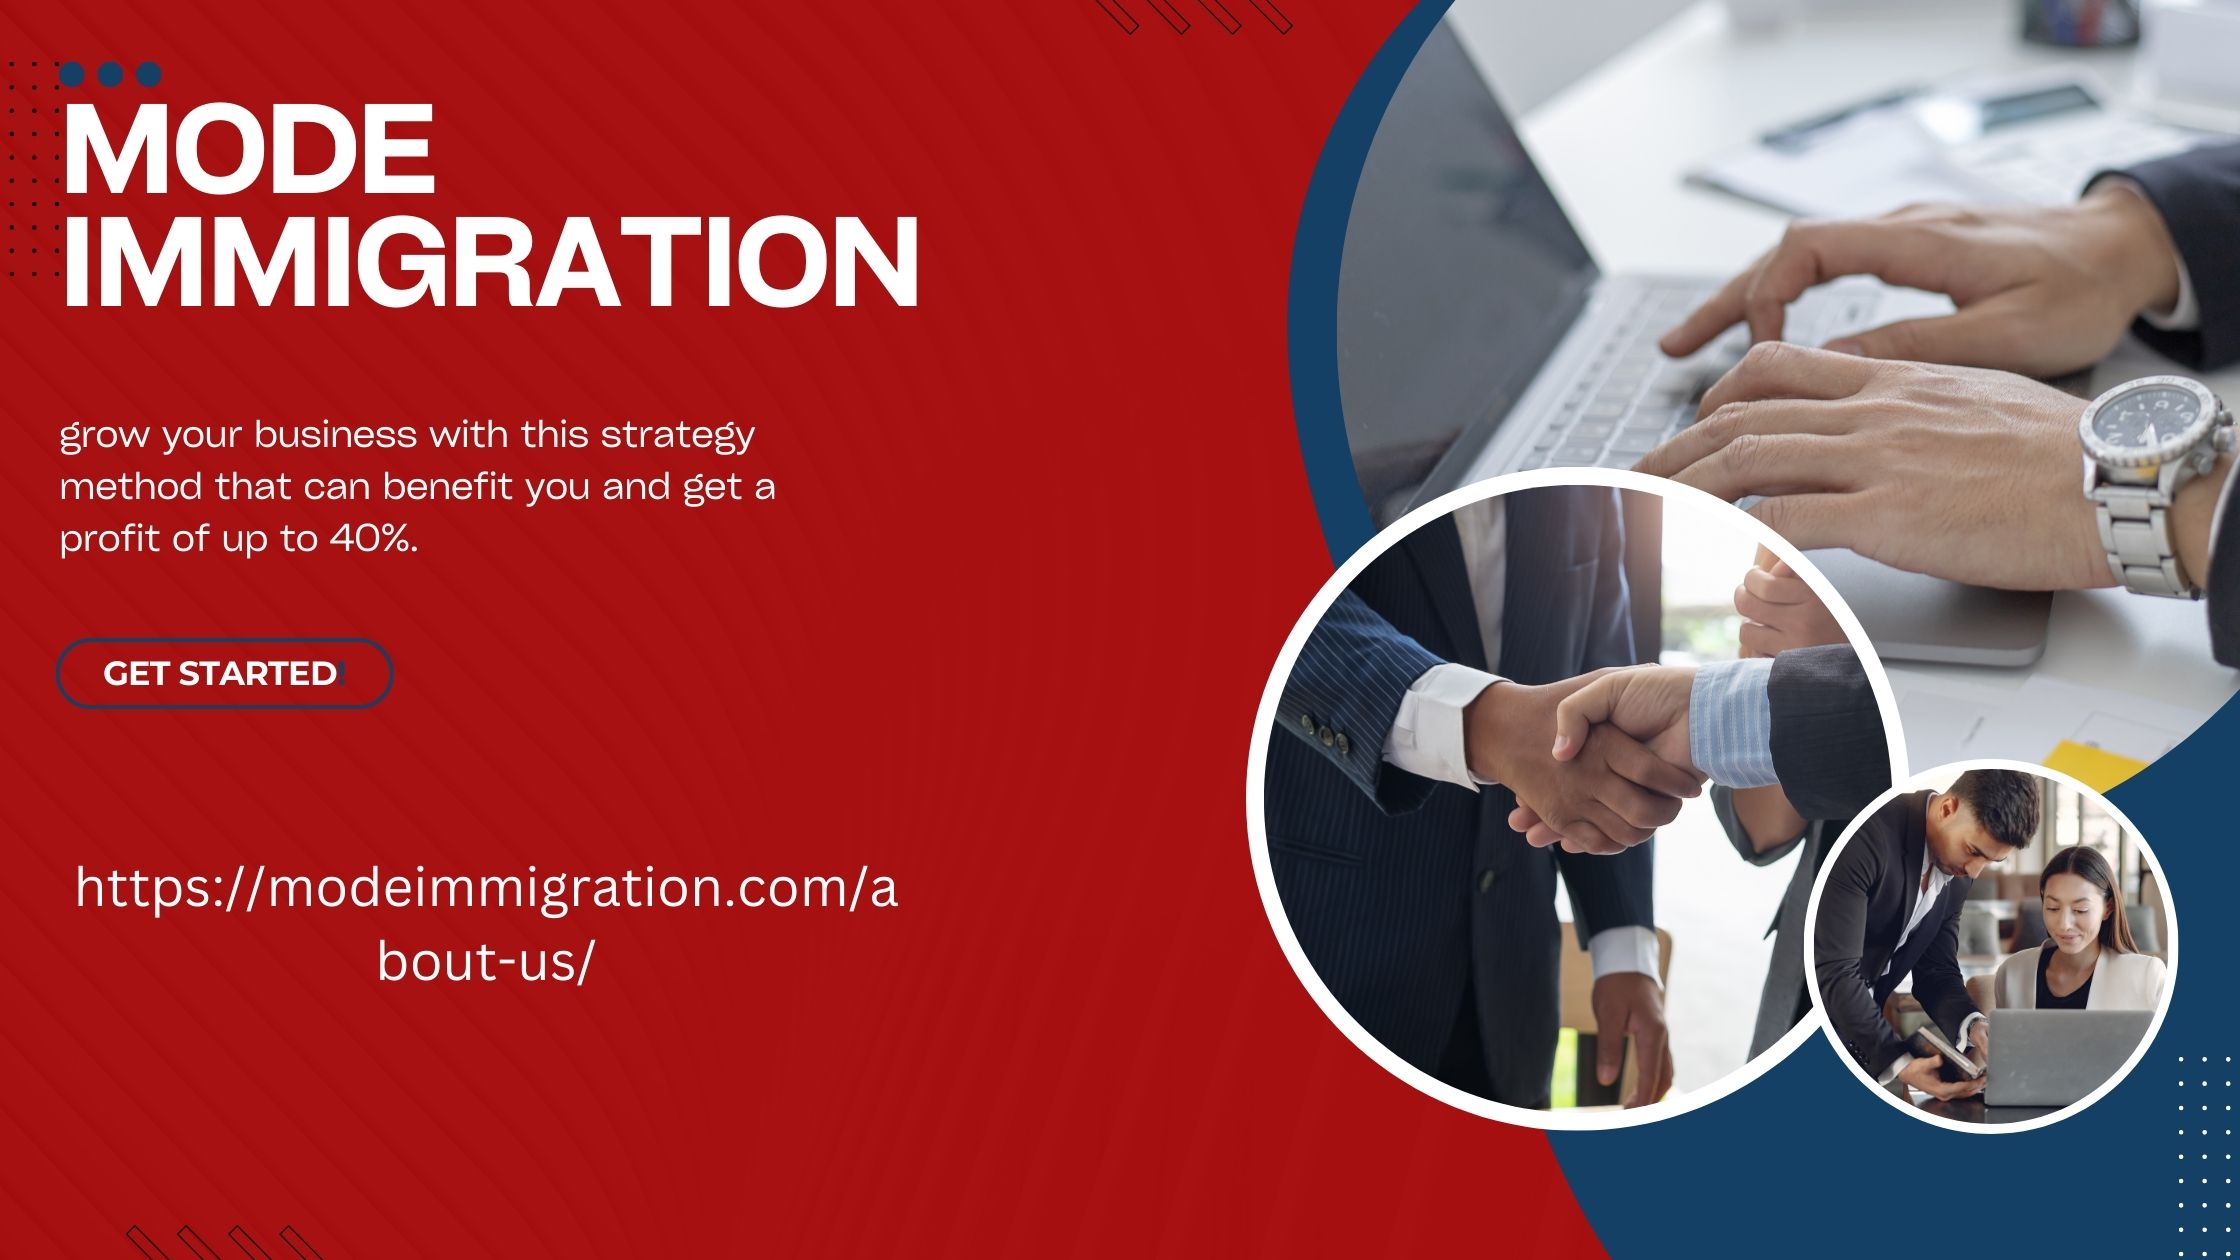 Can Foreigners Get a Visitor Visa to Work Permit While in Canada Using a Visitor Visa?